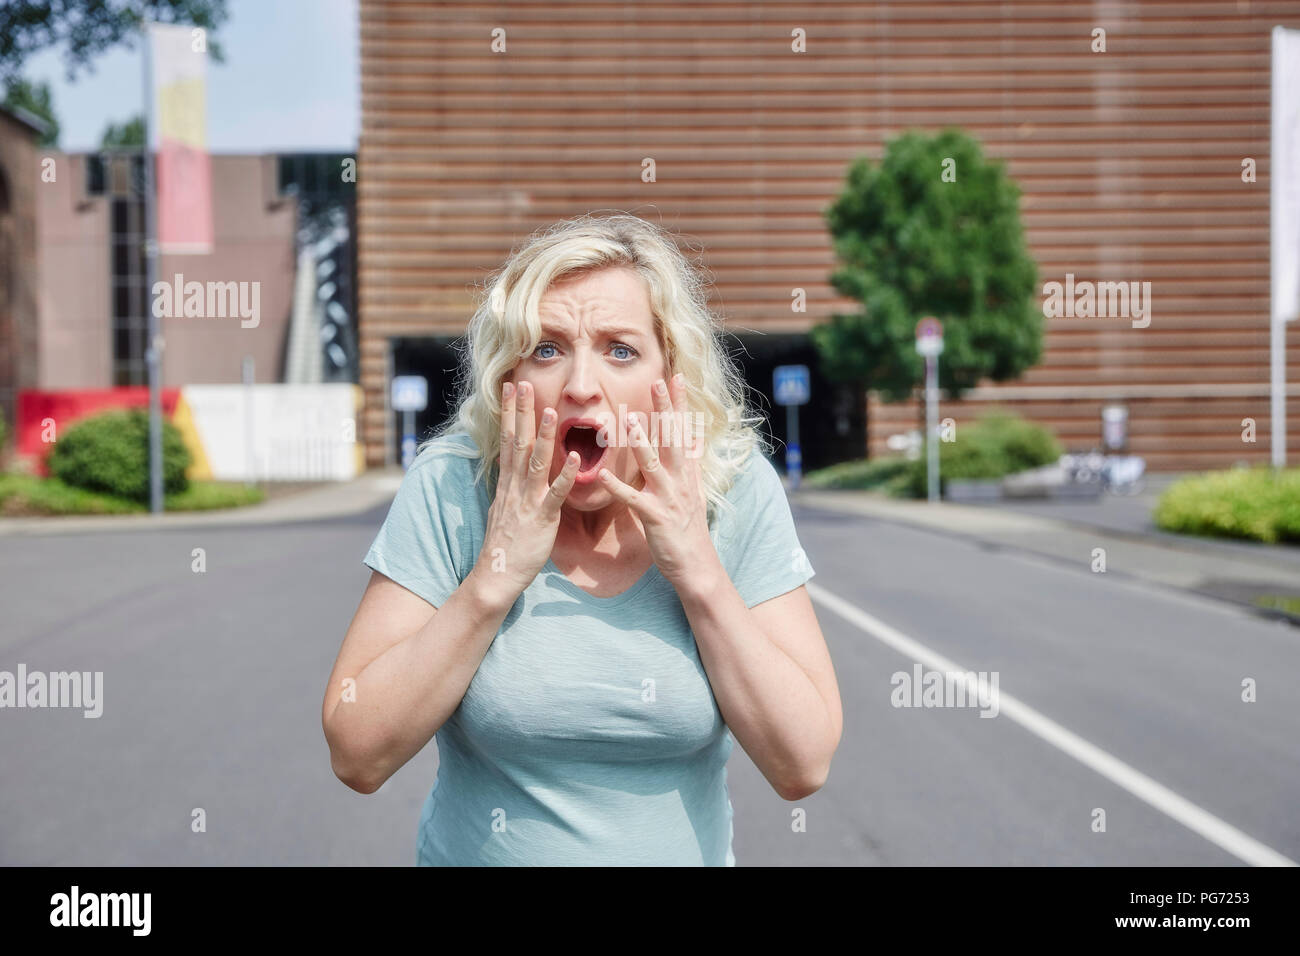 Portrait of shocked woman outdoors Stock Photo